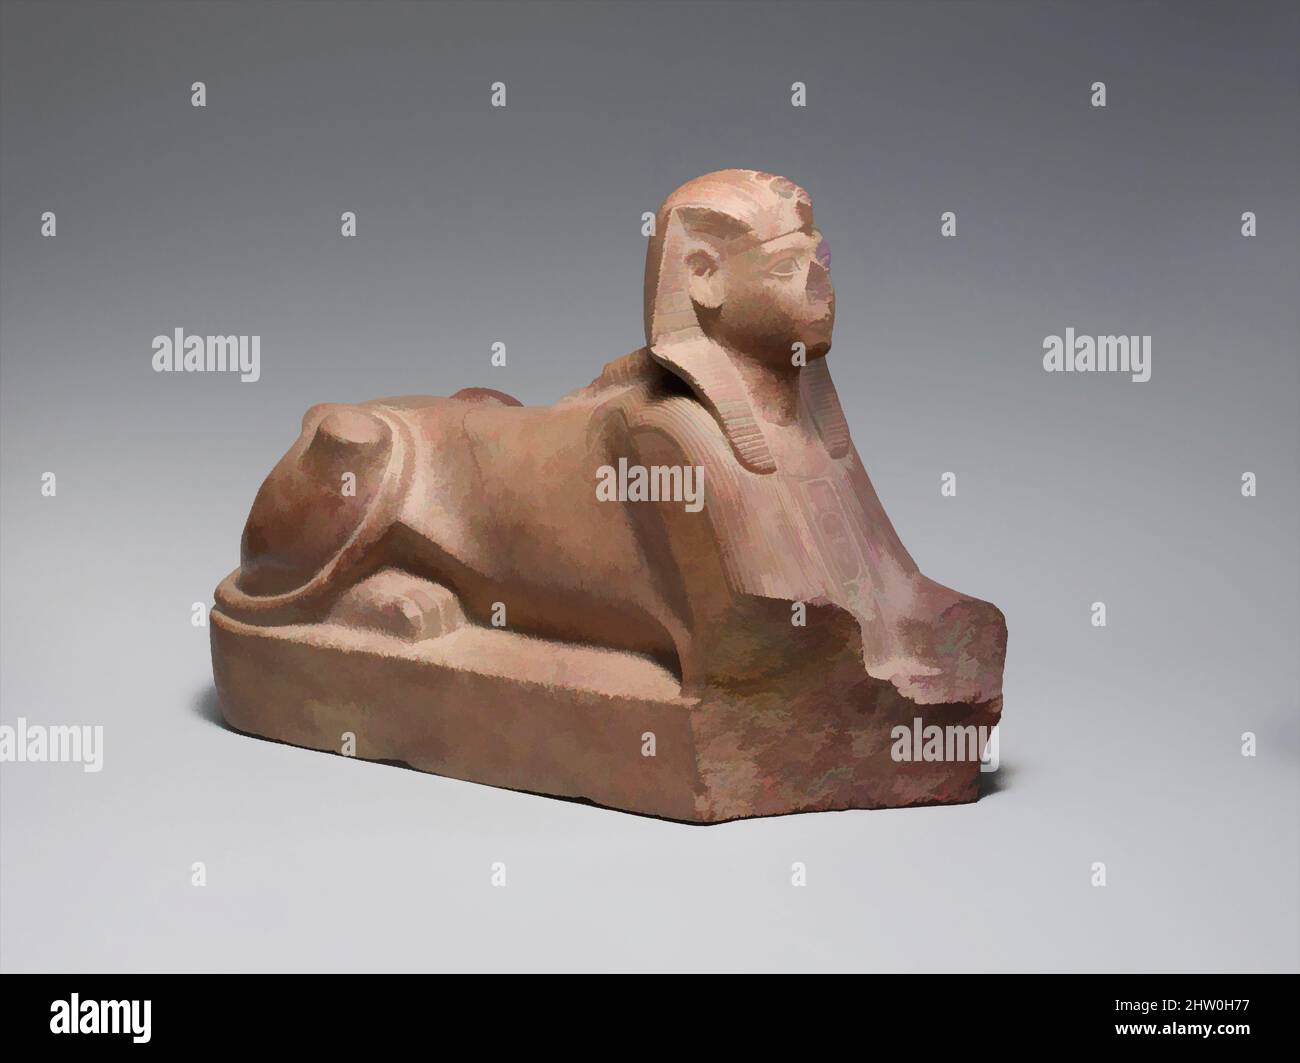 Art inspired by Sphinx of Thutmose III, New Kingdom, Dynasty 18, ca. 1479–1425 B.C., From Egypt, Quartzite, l. 34.6 cm (13 5/8 in); w. 11.4 cm (4 1/2 in); h.. 23.3 cm (9 3/16 in); weight 4.5 kg (9.9 lb), This finely executed representation of Thutmose III is made of extremely hard, Classic works modernized by Artotop with a splash of modernity. Shapes, color and value, eye-catching visual impact on art. Emotions through freedom of artworks in a contemporary way. A timeless message pursuing a wildly creative new direction. Artists turning to the digital medium and creating the Artotop NFT Stock Photo